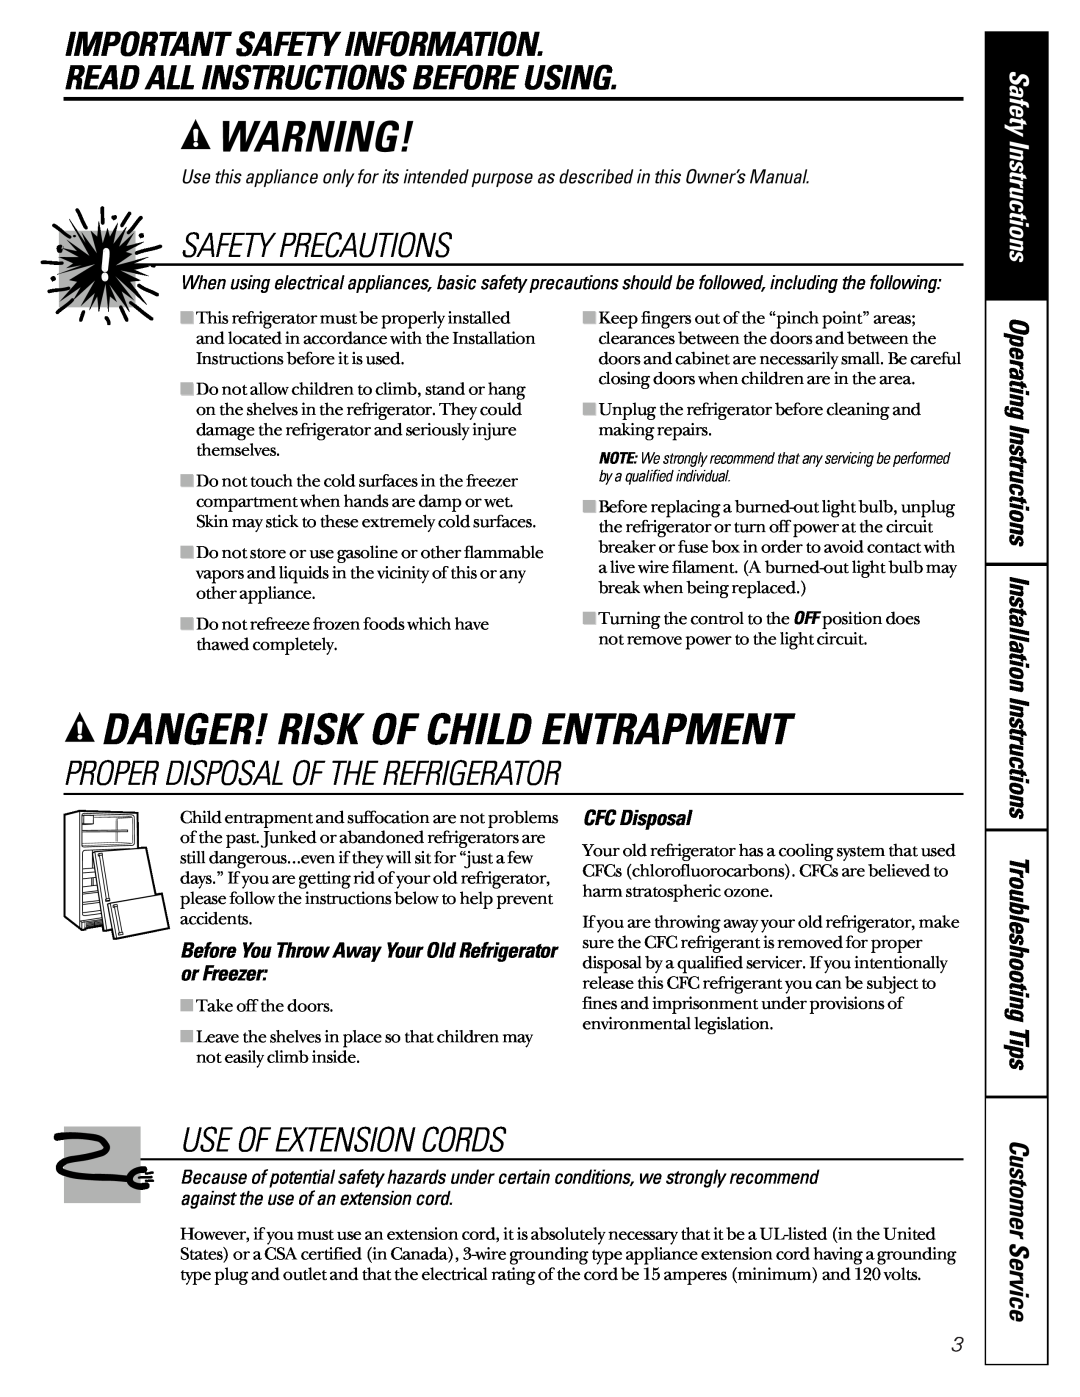 GE TCS18 Danger! Risk Of Child Entrapment, Important Safety Information Read All Instructions Before Using, CFC Disposal 